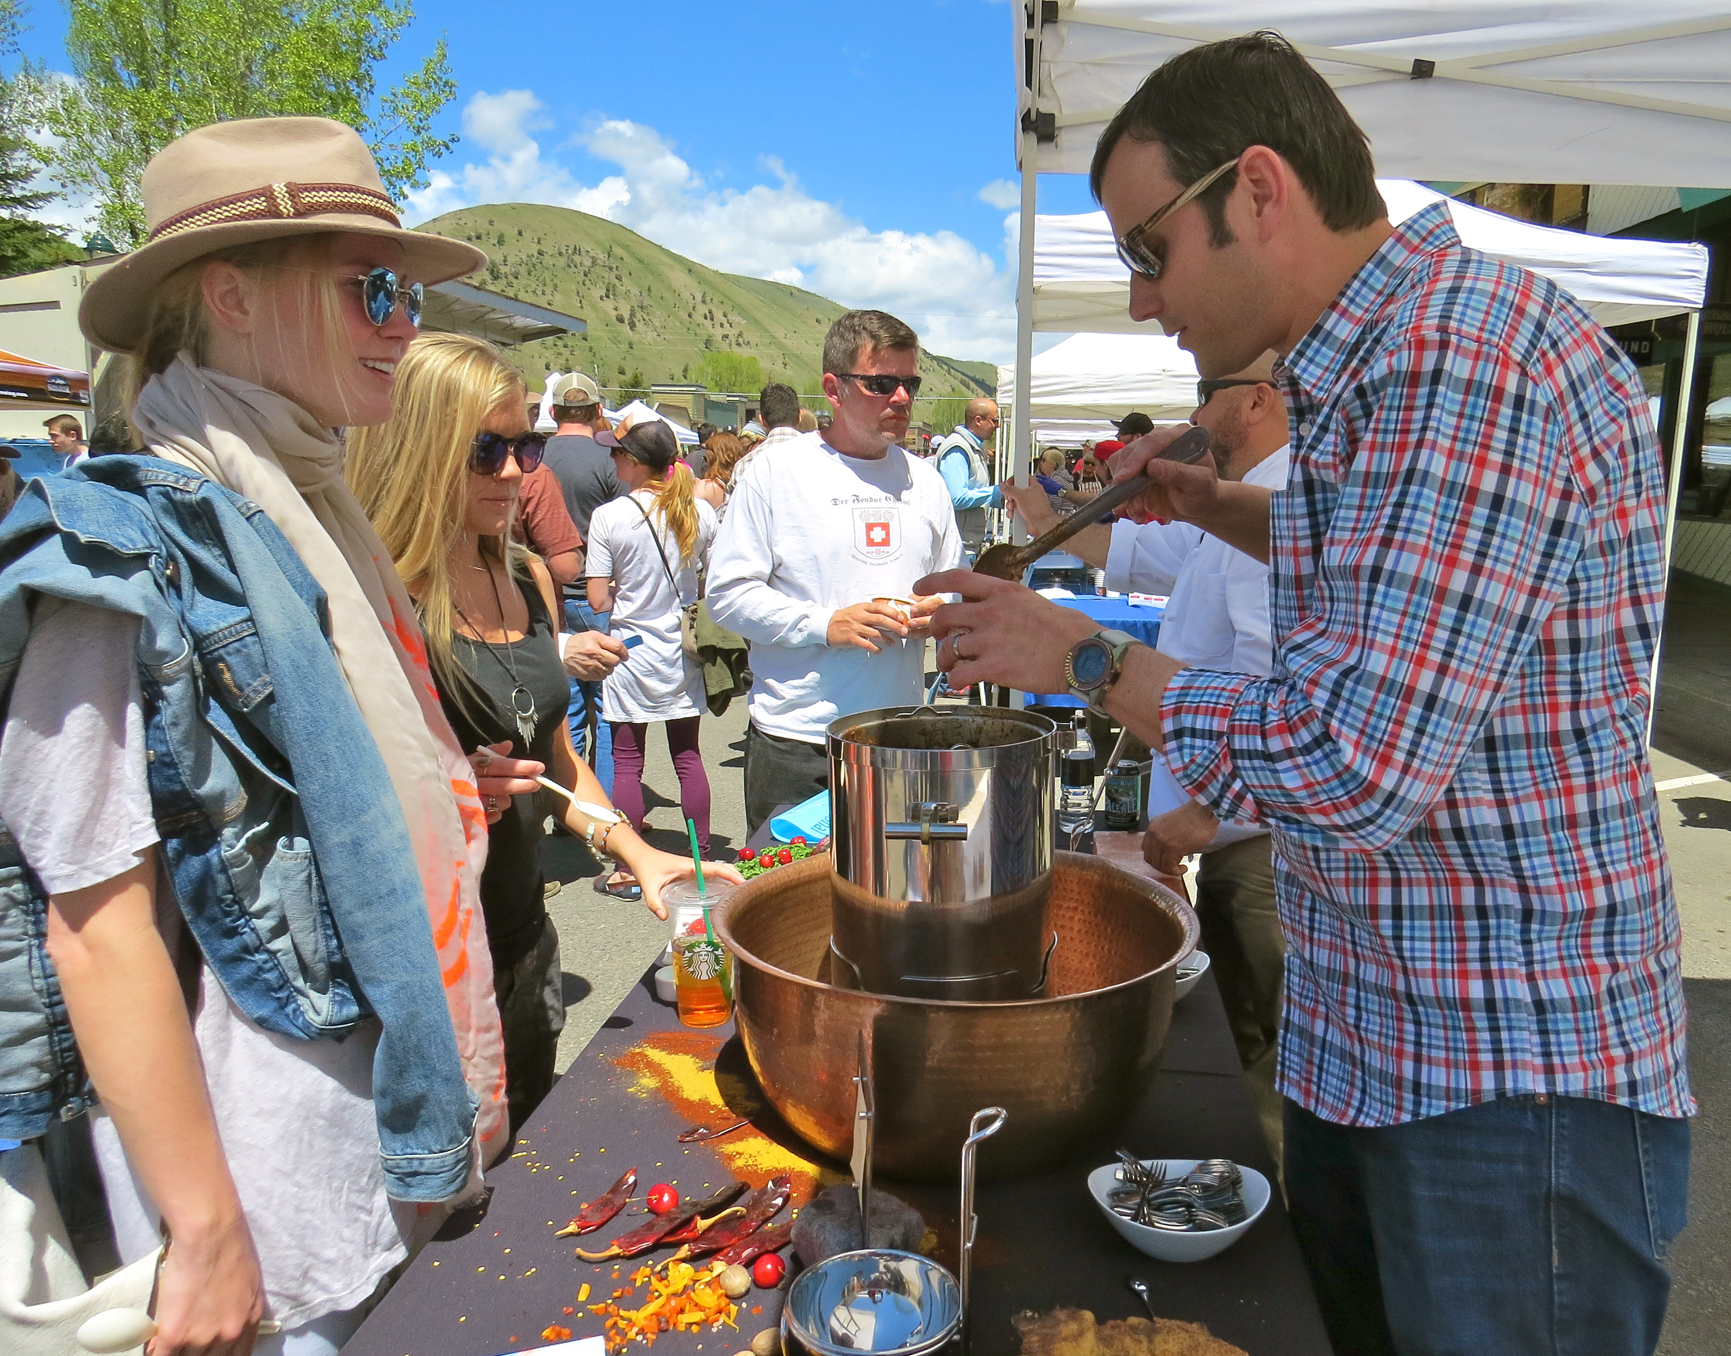 The High Noon Chili Cook Off brings out locals and visitors appetites for a festive street party in Jackson Town Square, sampling best-of-the-West chili from regional chefs during ElkFest.